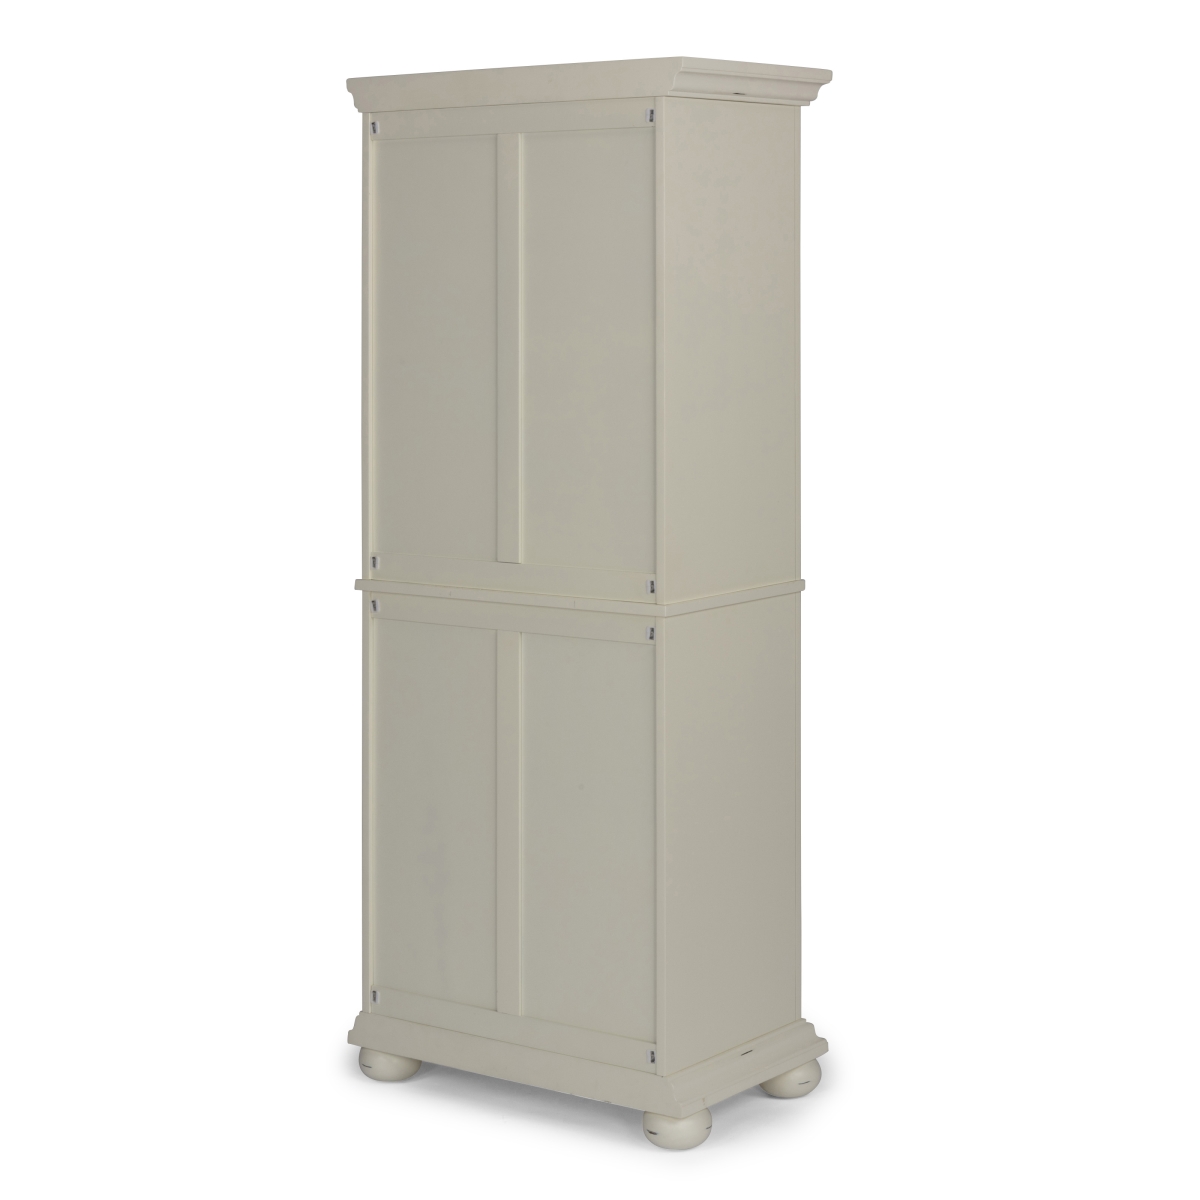 Picture of Homestyles 5427-69 Dover Pantry, Off-White - 72 x 30 x 18 in.